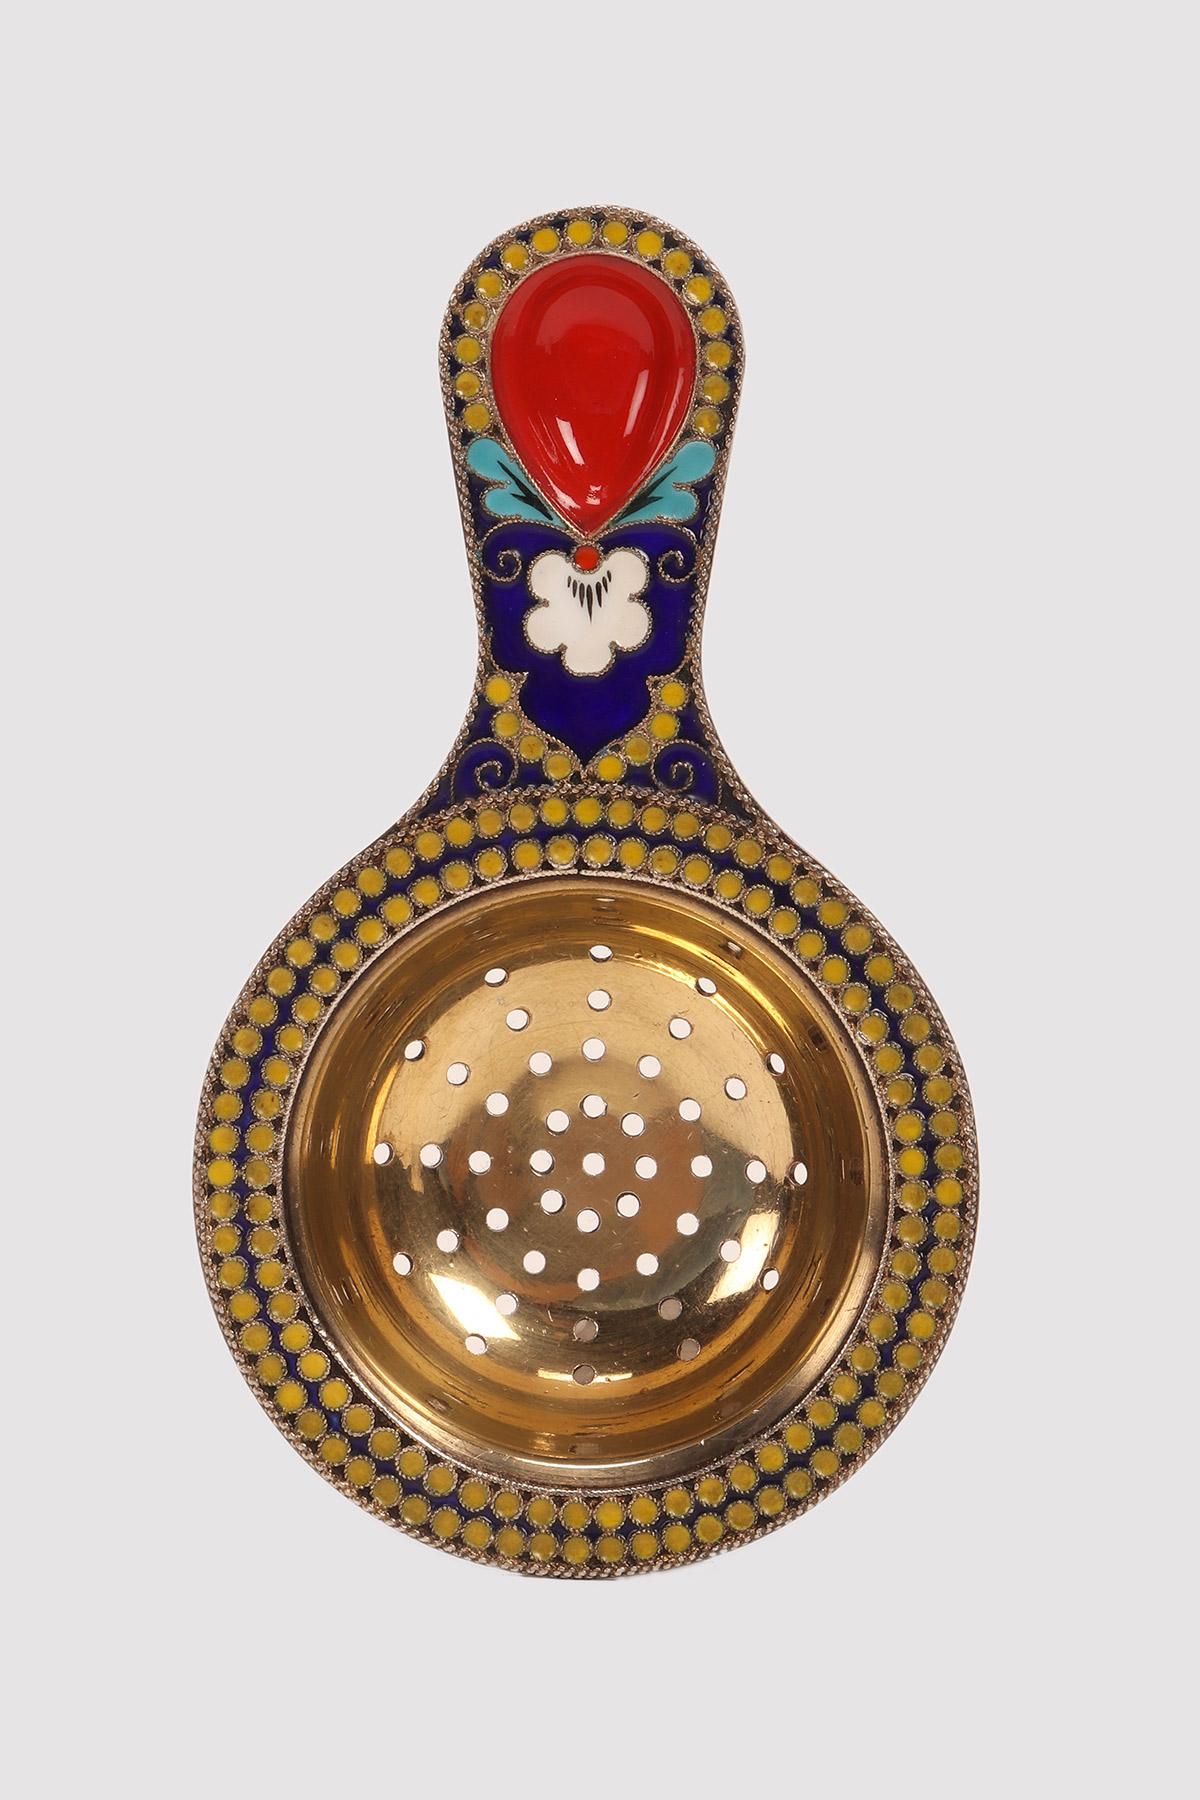 Tea strainer with handle, silver gilded and decorated with yellow, blue and red cloisonné enamels. URSS, circa 1940.